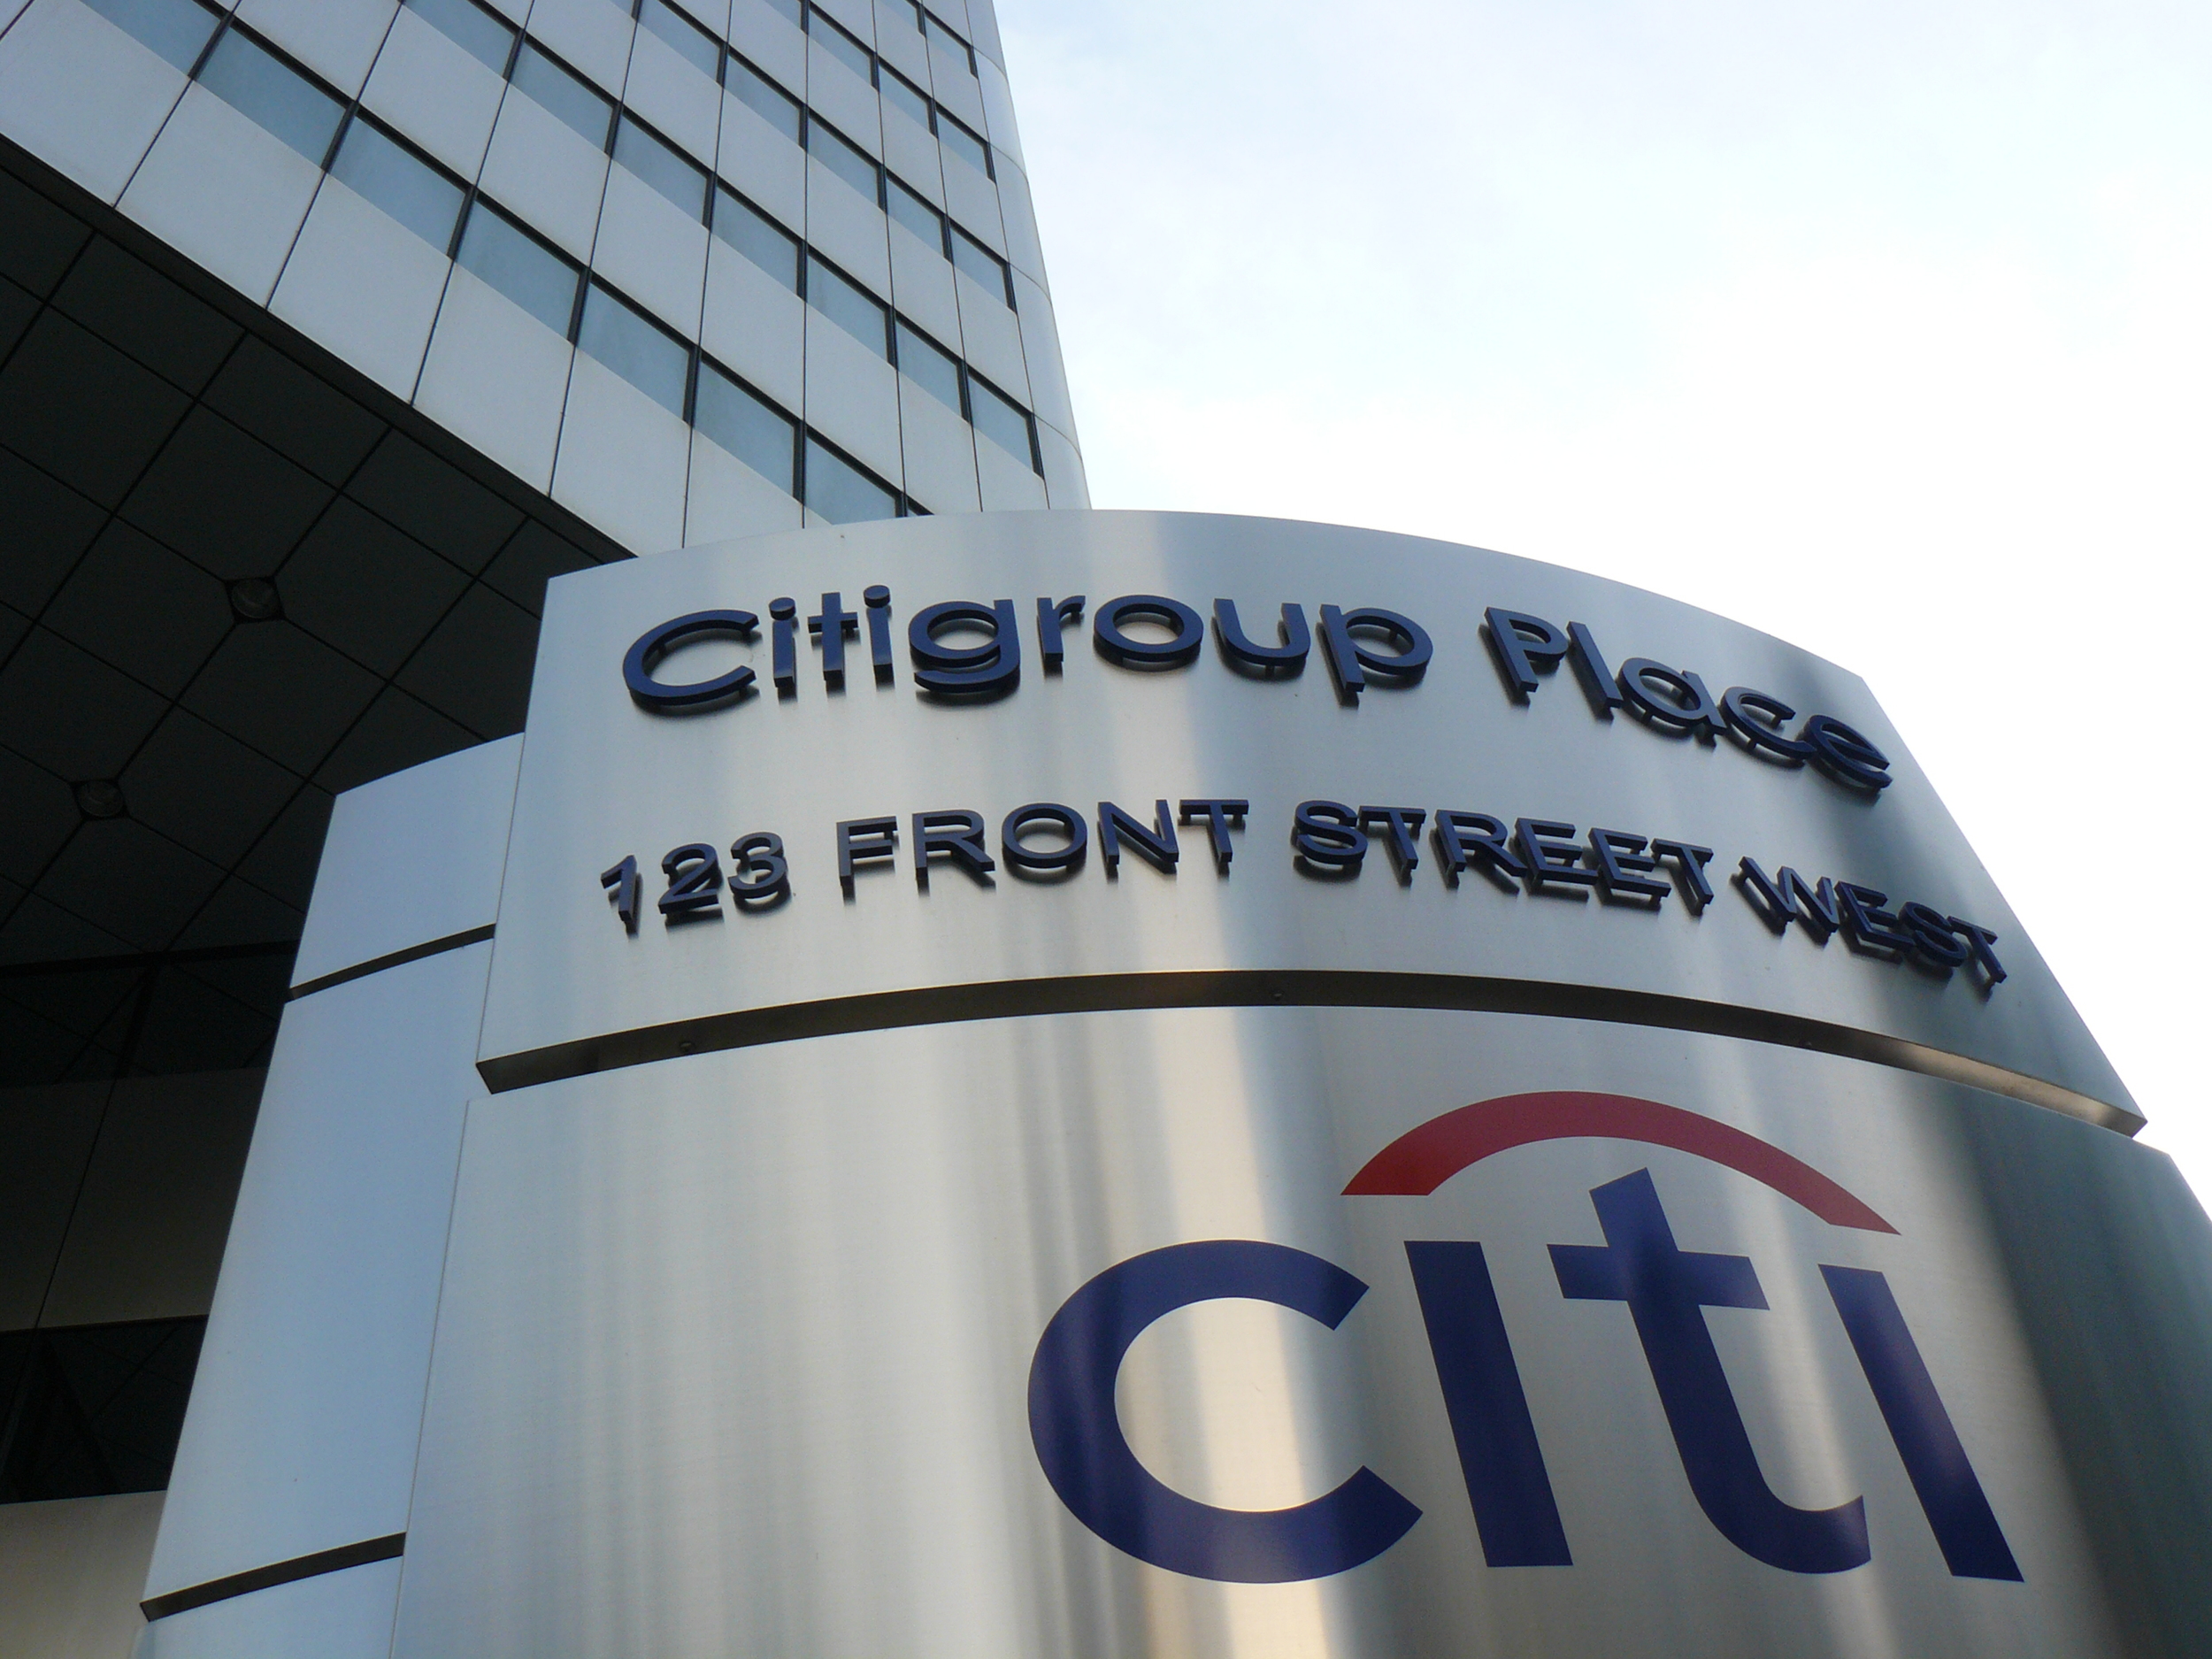 Citi’s $100 billion commitment to finance sustainable growth